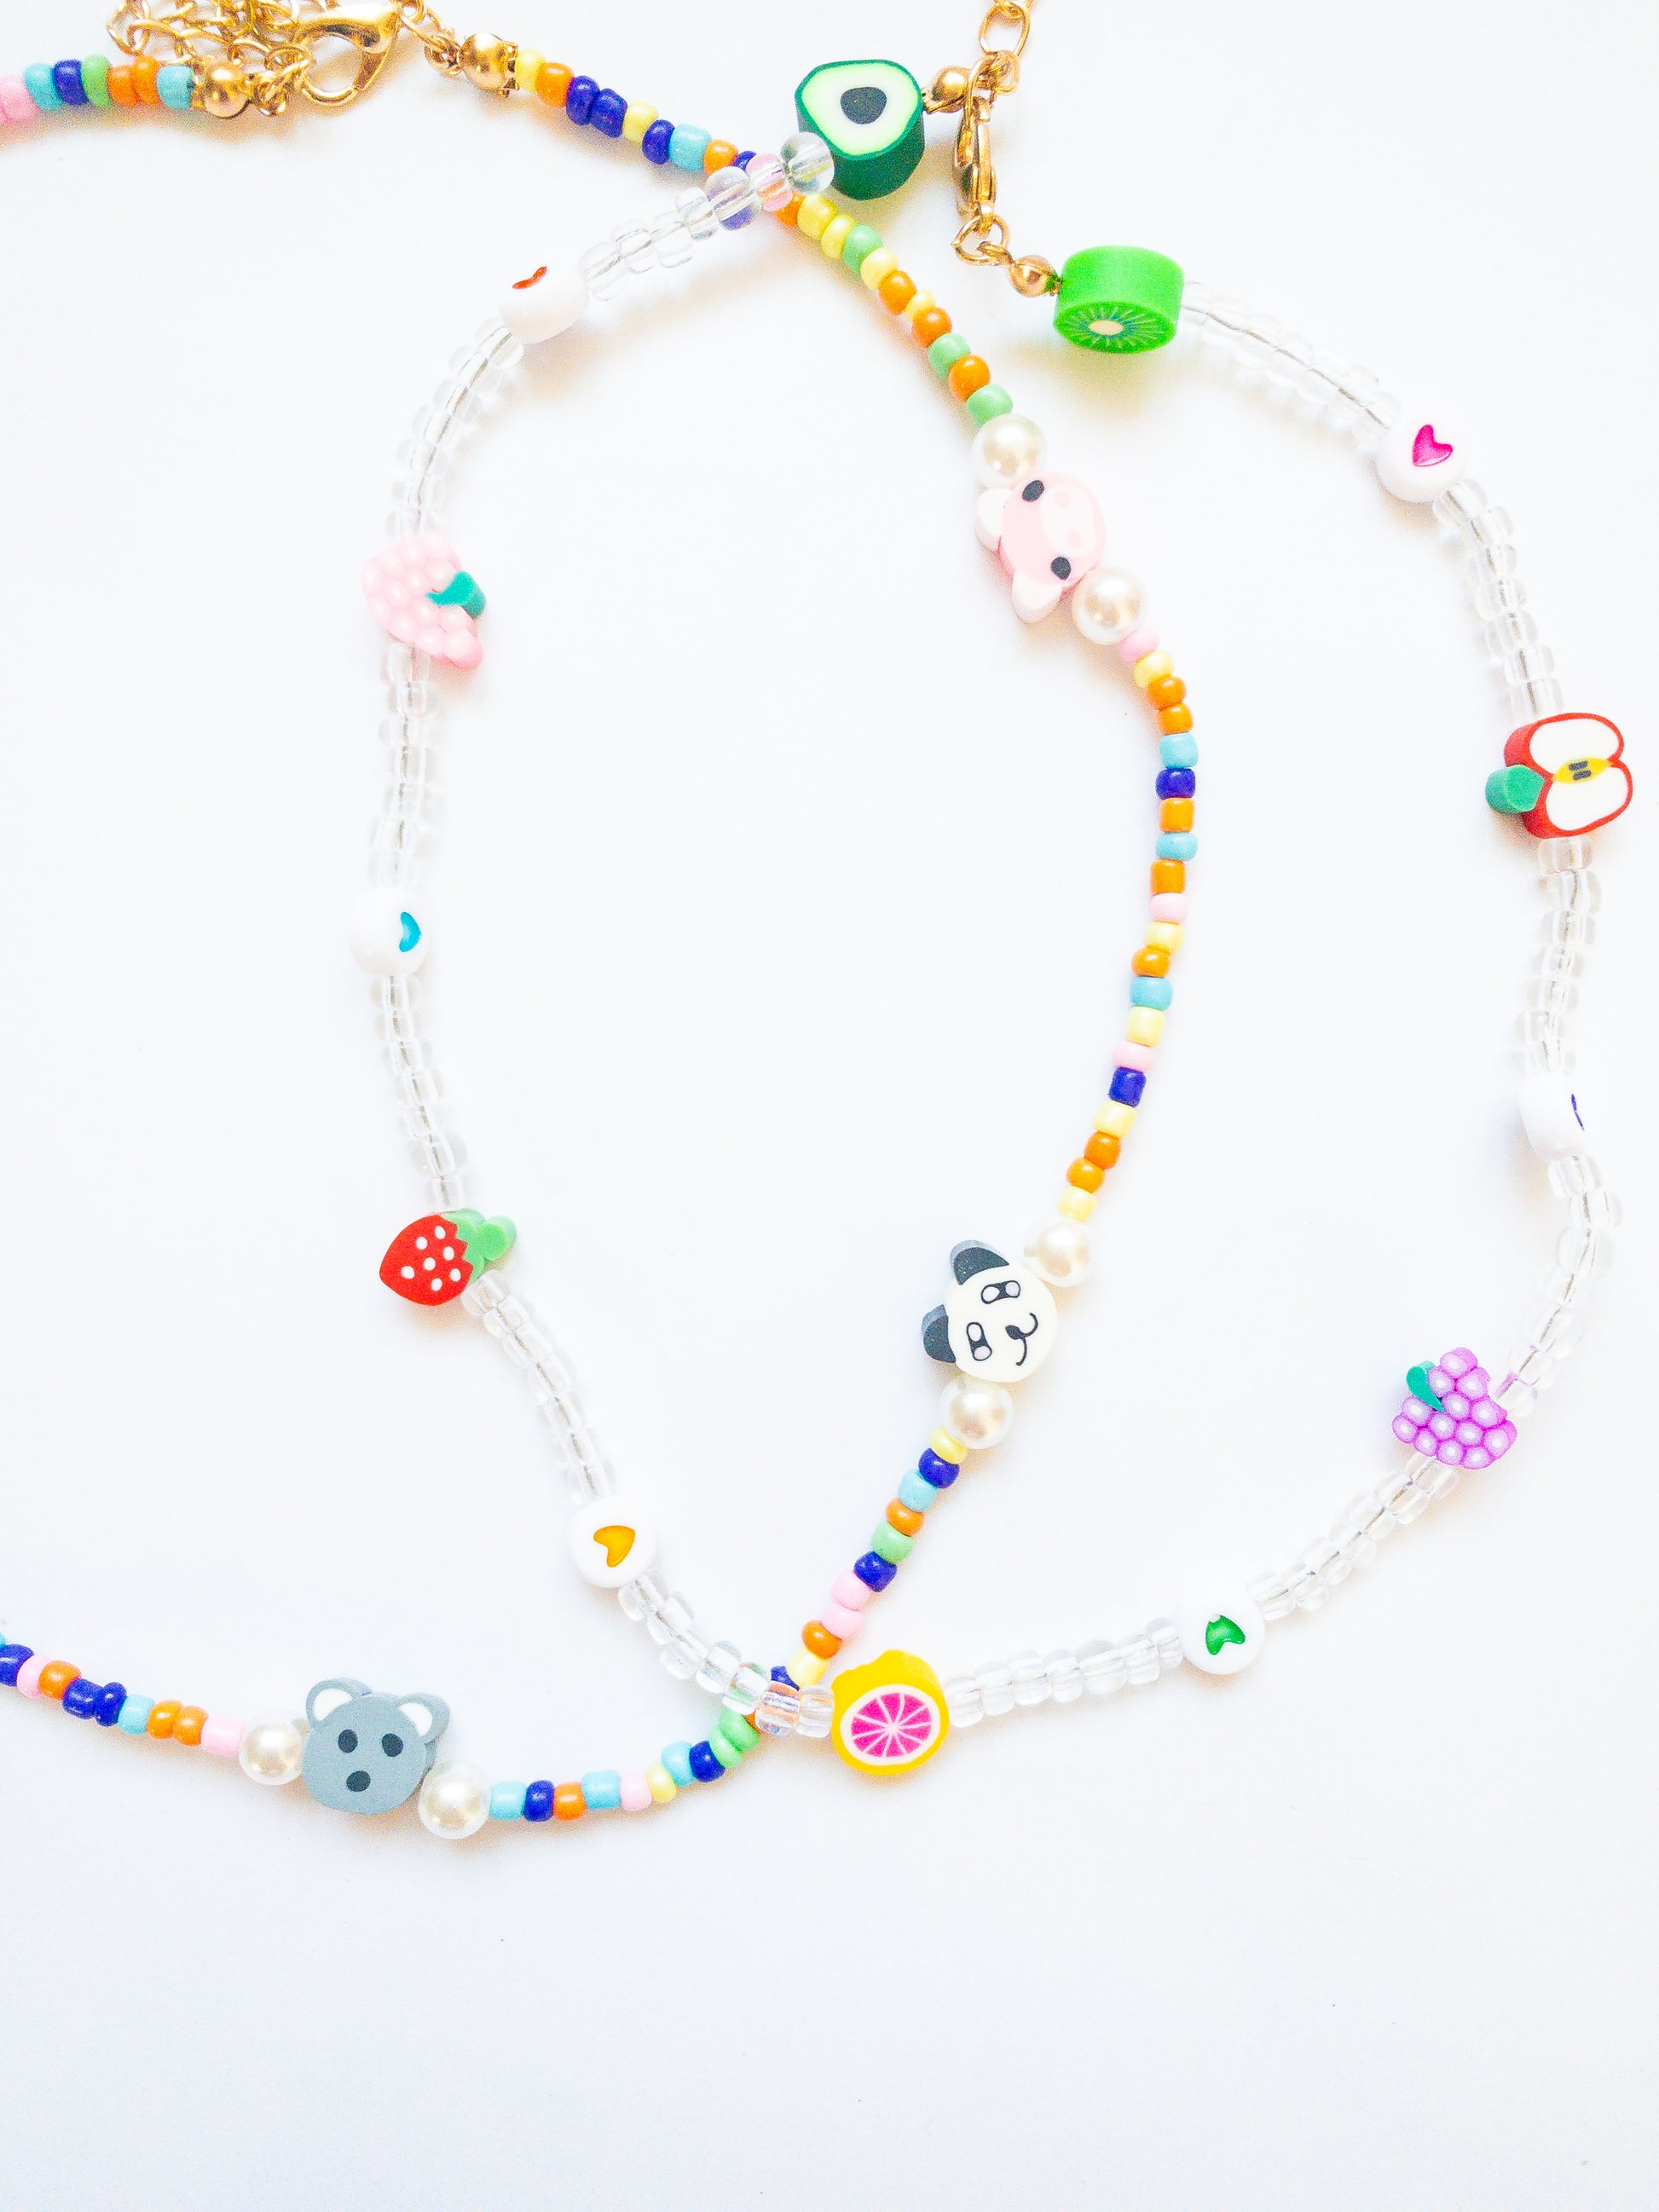 Cutie fruity necklace set! This critter necklace is bright and colorful with a cutie crew of animals and this fruity necklace has clear beads with hearts and juicy fruits. Each necklace is adjustable in length.